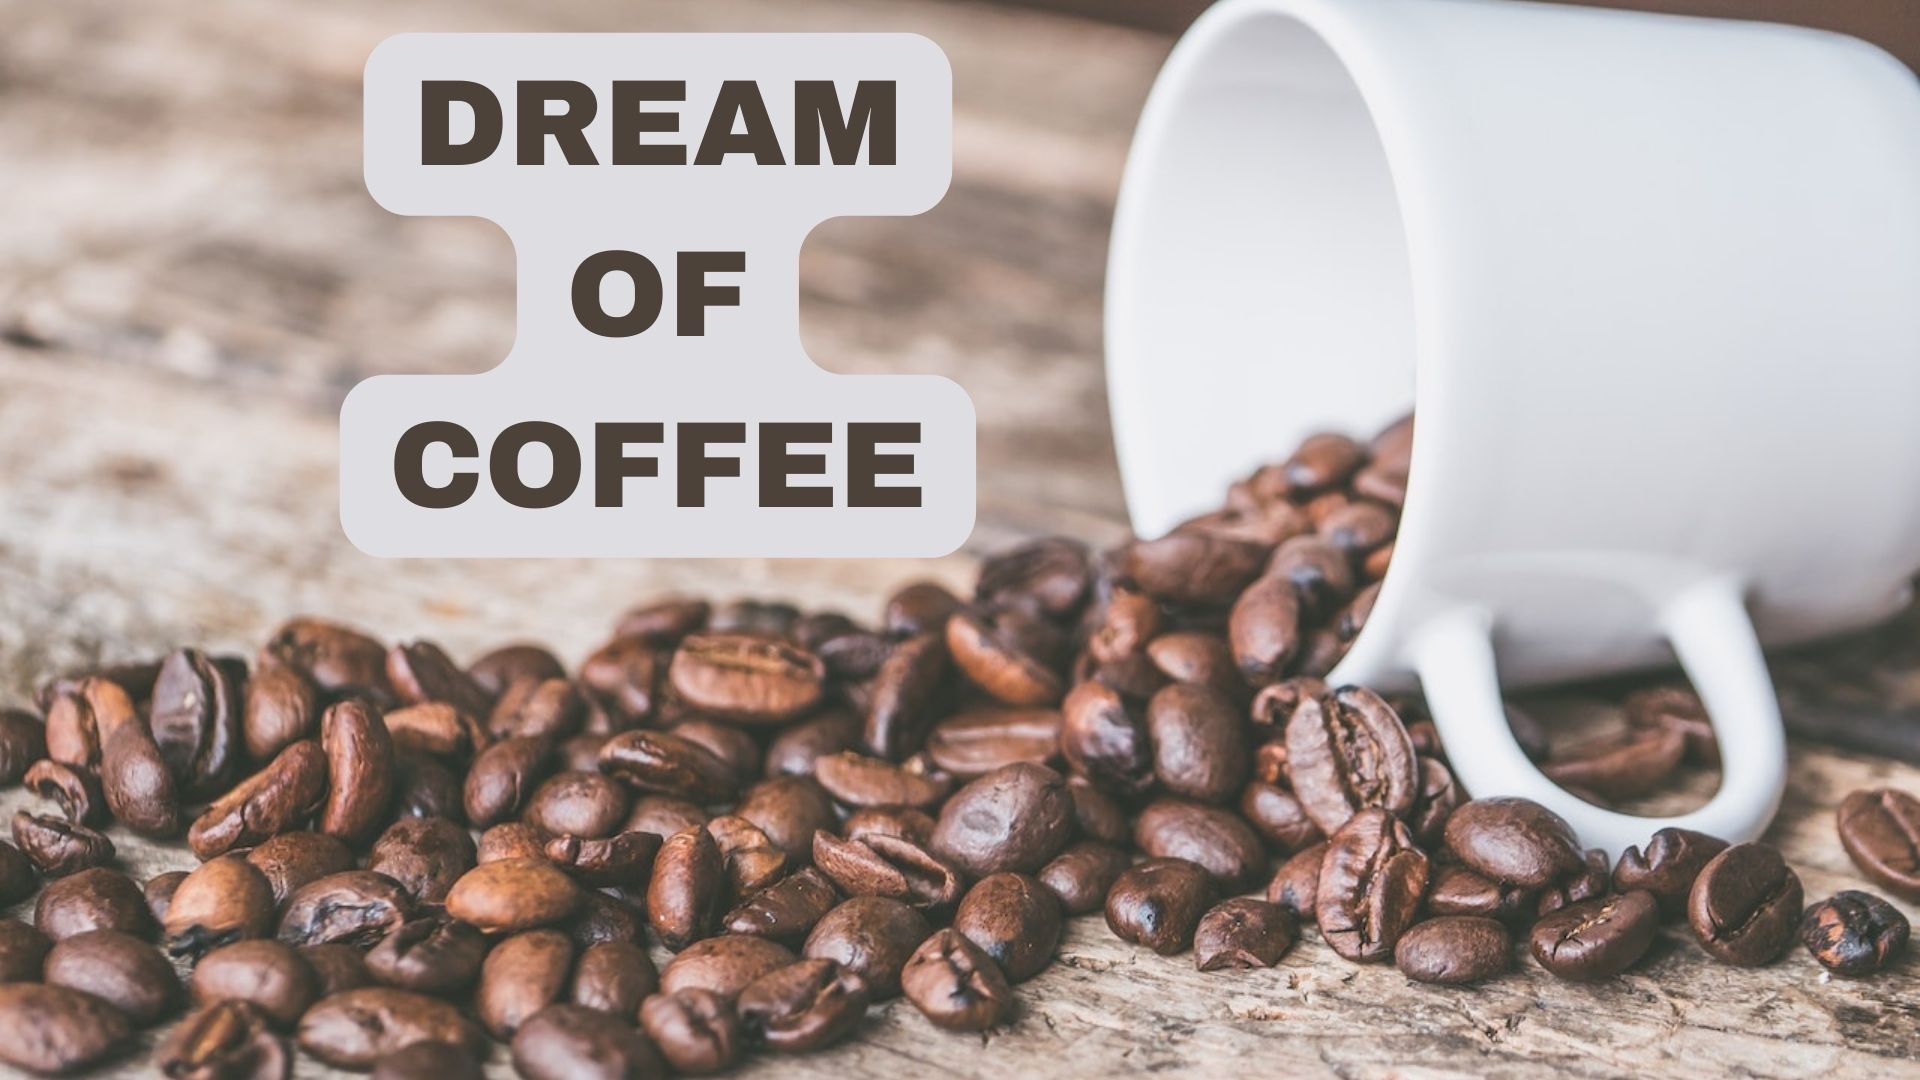 Dream Of Coffee - Represents Something Related To Strength